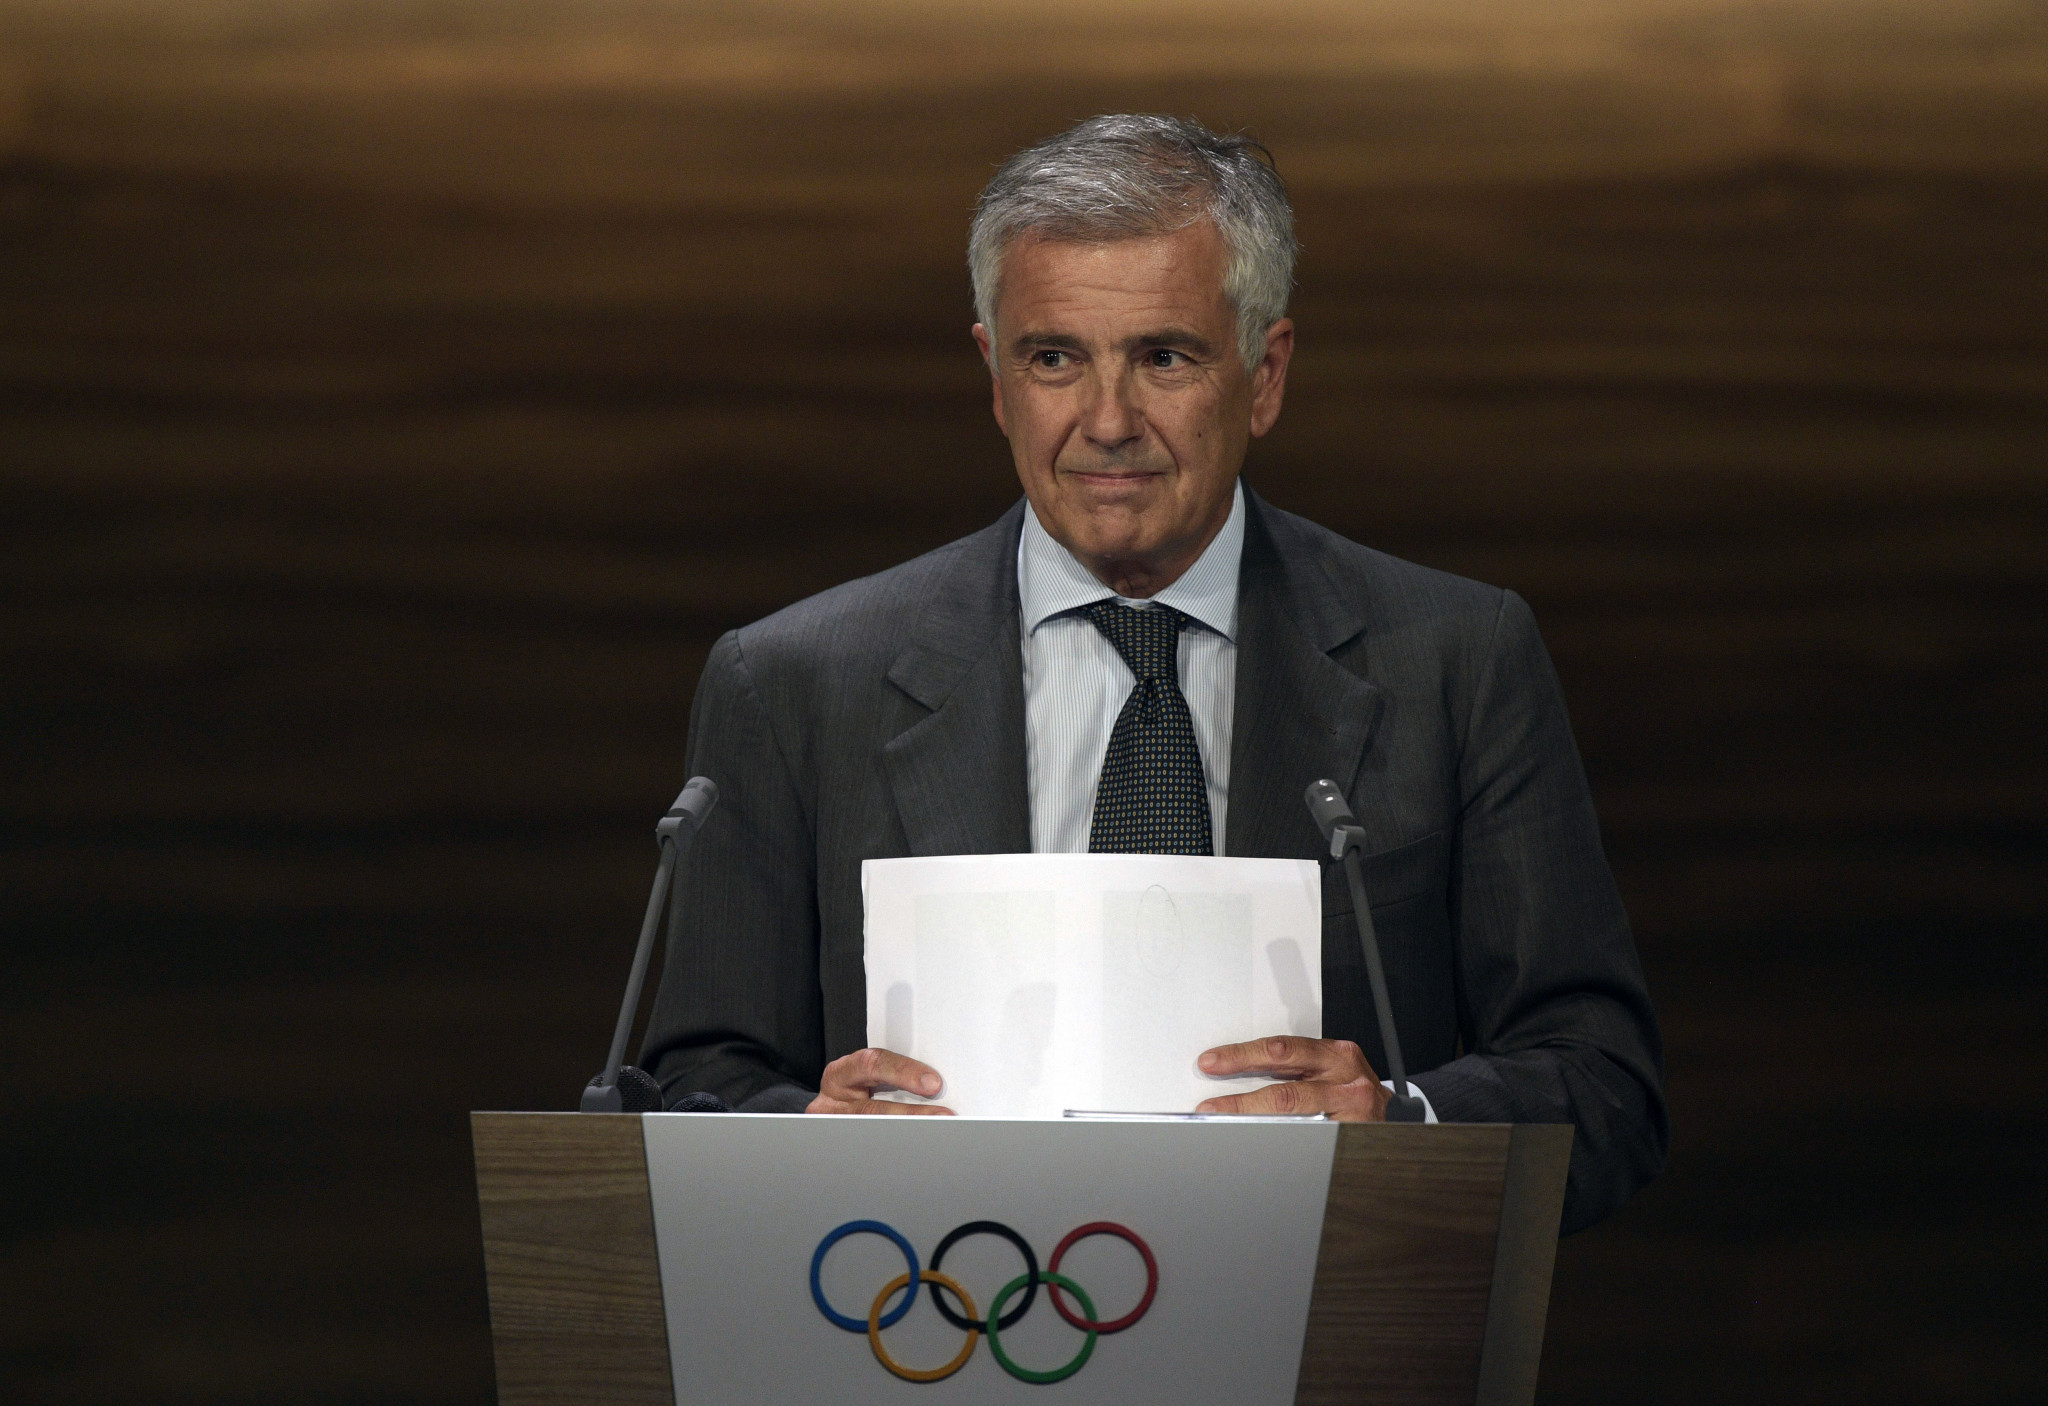 IOC vice-president and the Working Group on the 2026 Winter Olympic and Paralympic bids Juan-Antonio Samaranch was full of praise for the three bids at the Session in Buenos Aires today ©Getty Images